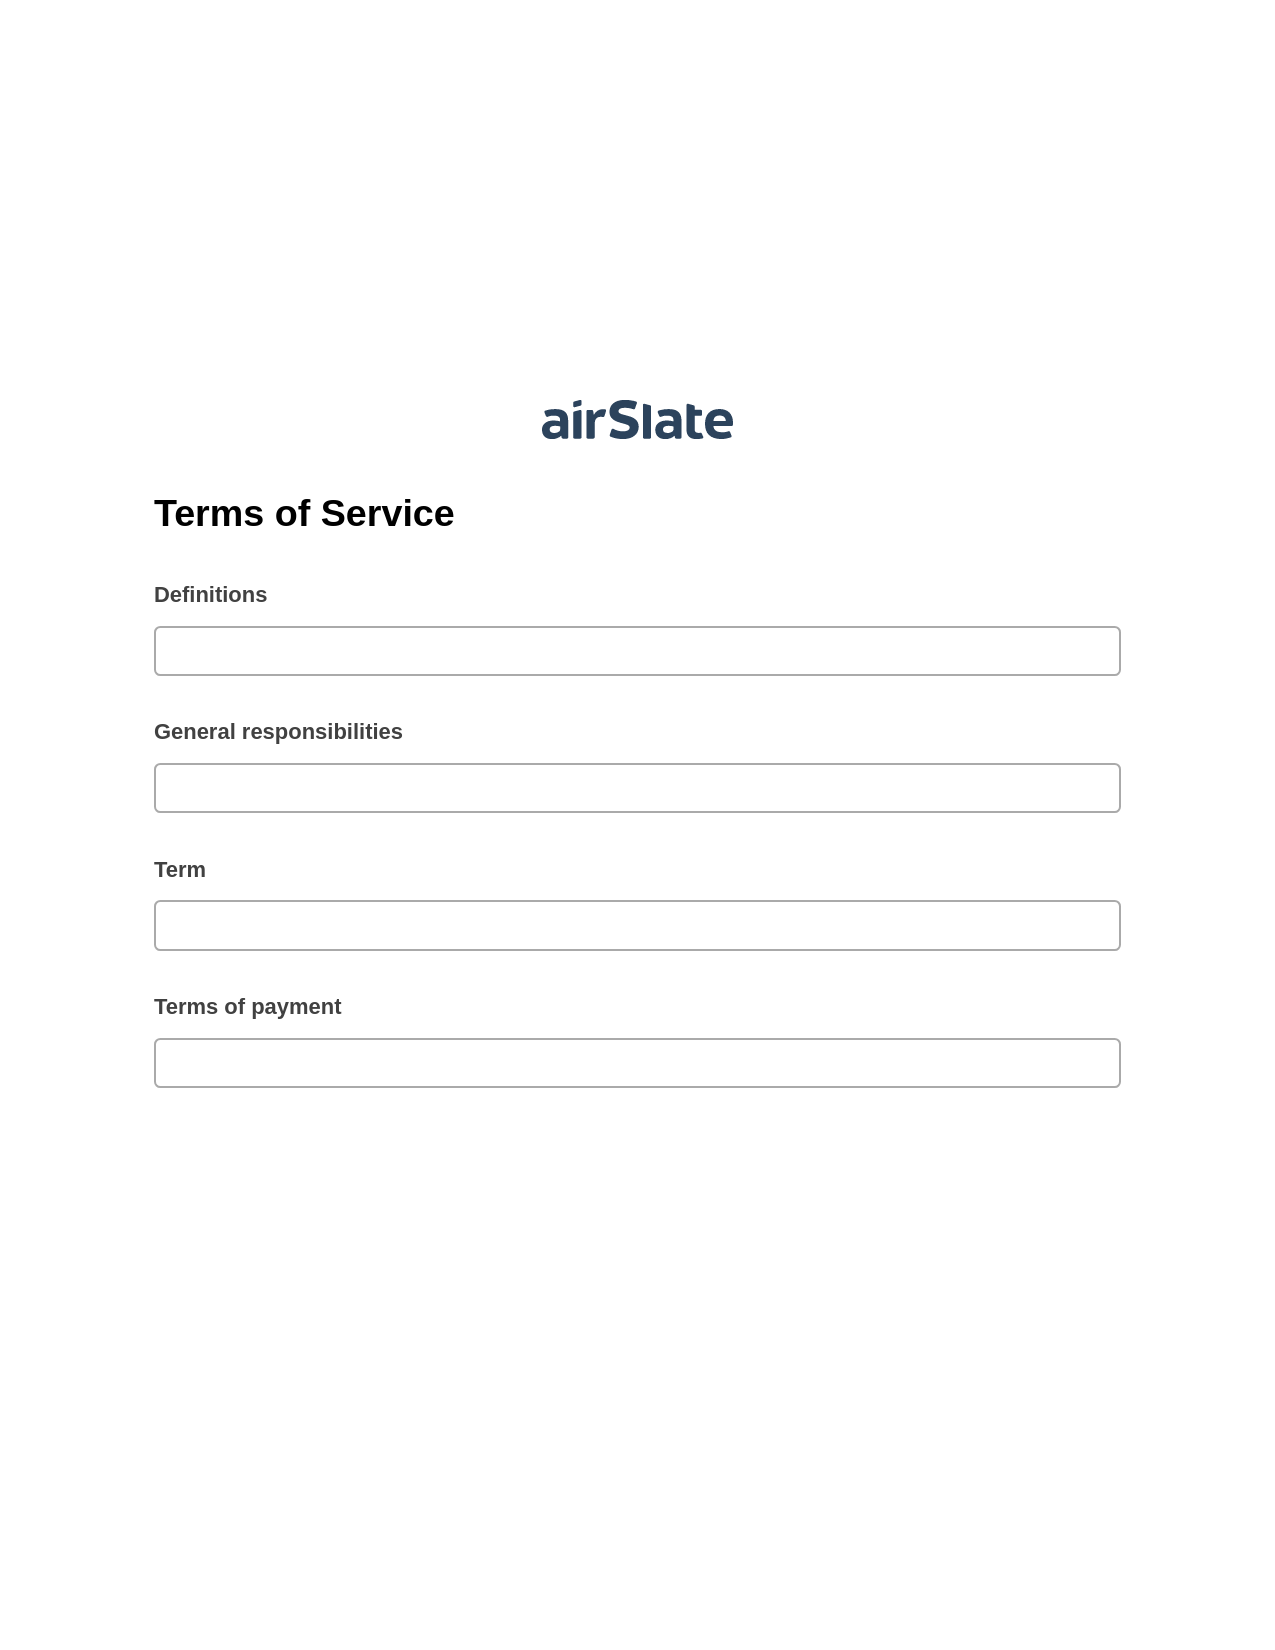 Multirole Terms of Service Pre-fill from Salesforce Records with SOQL Bot, Create slate addon, Export to Excel 365 Bot